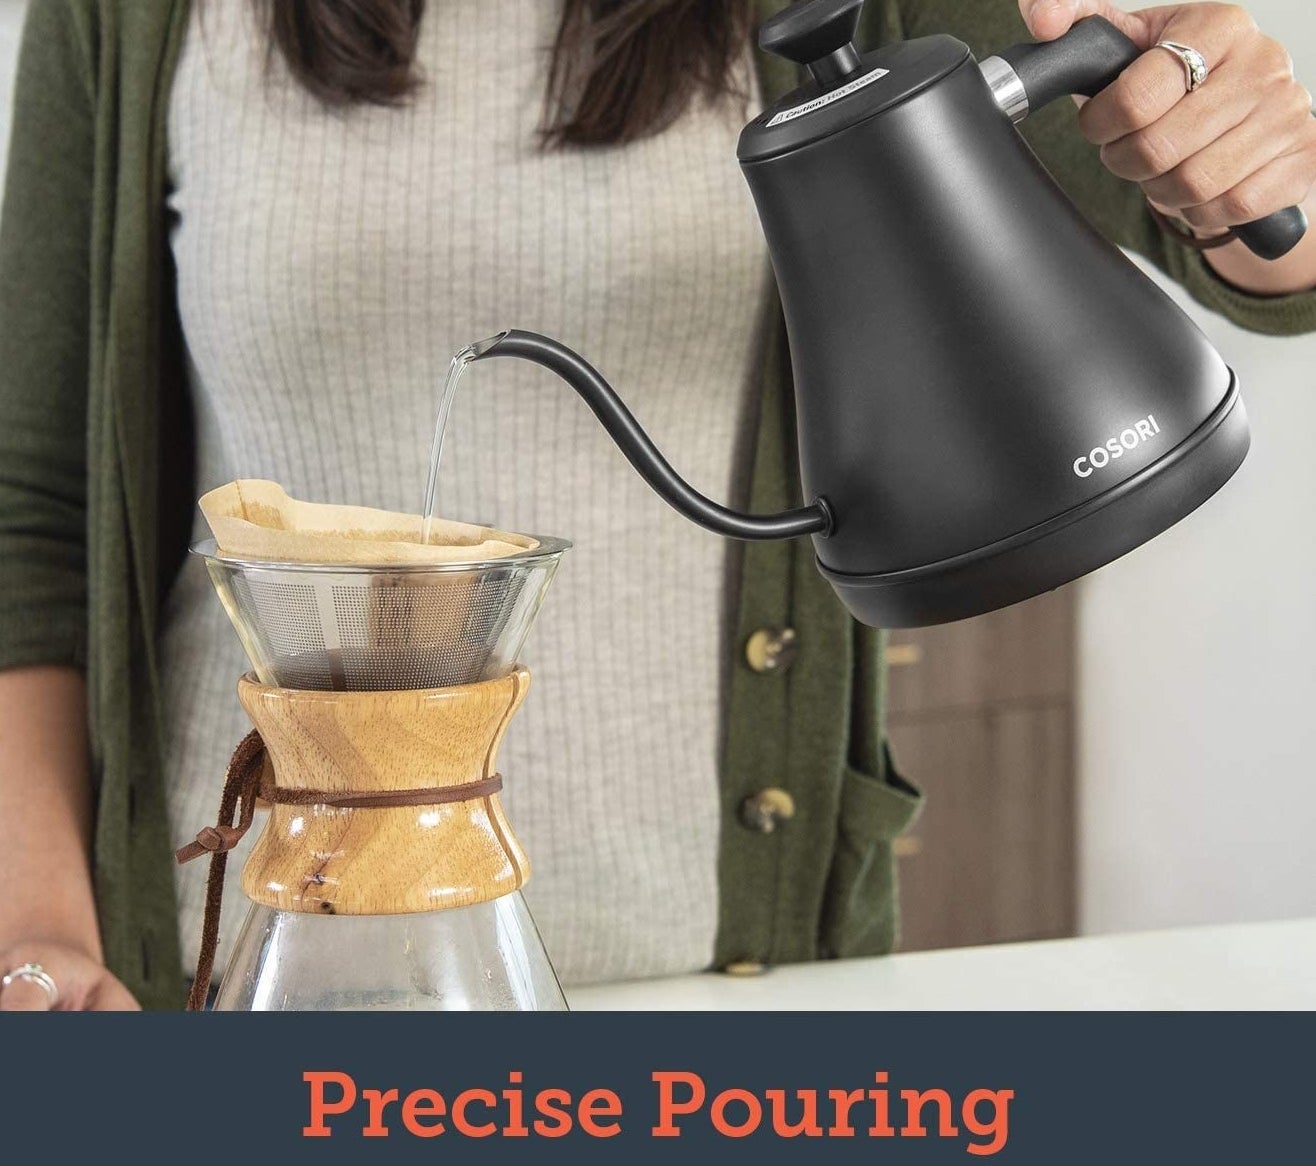 someone using the gooseneck kettle to make pour-over coffee